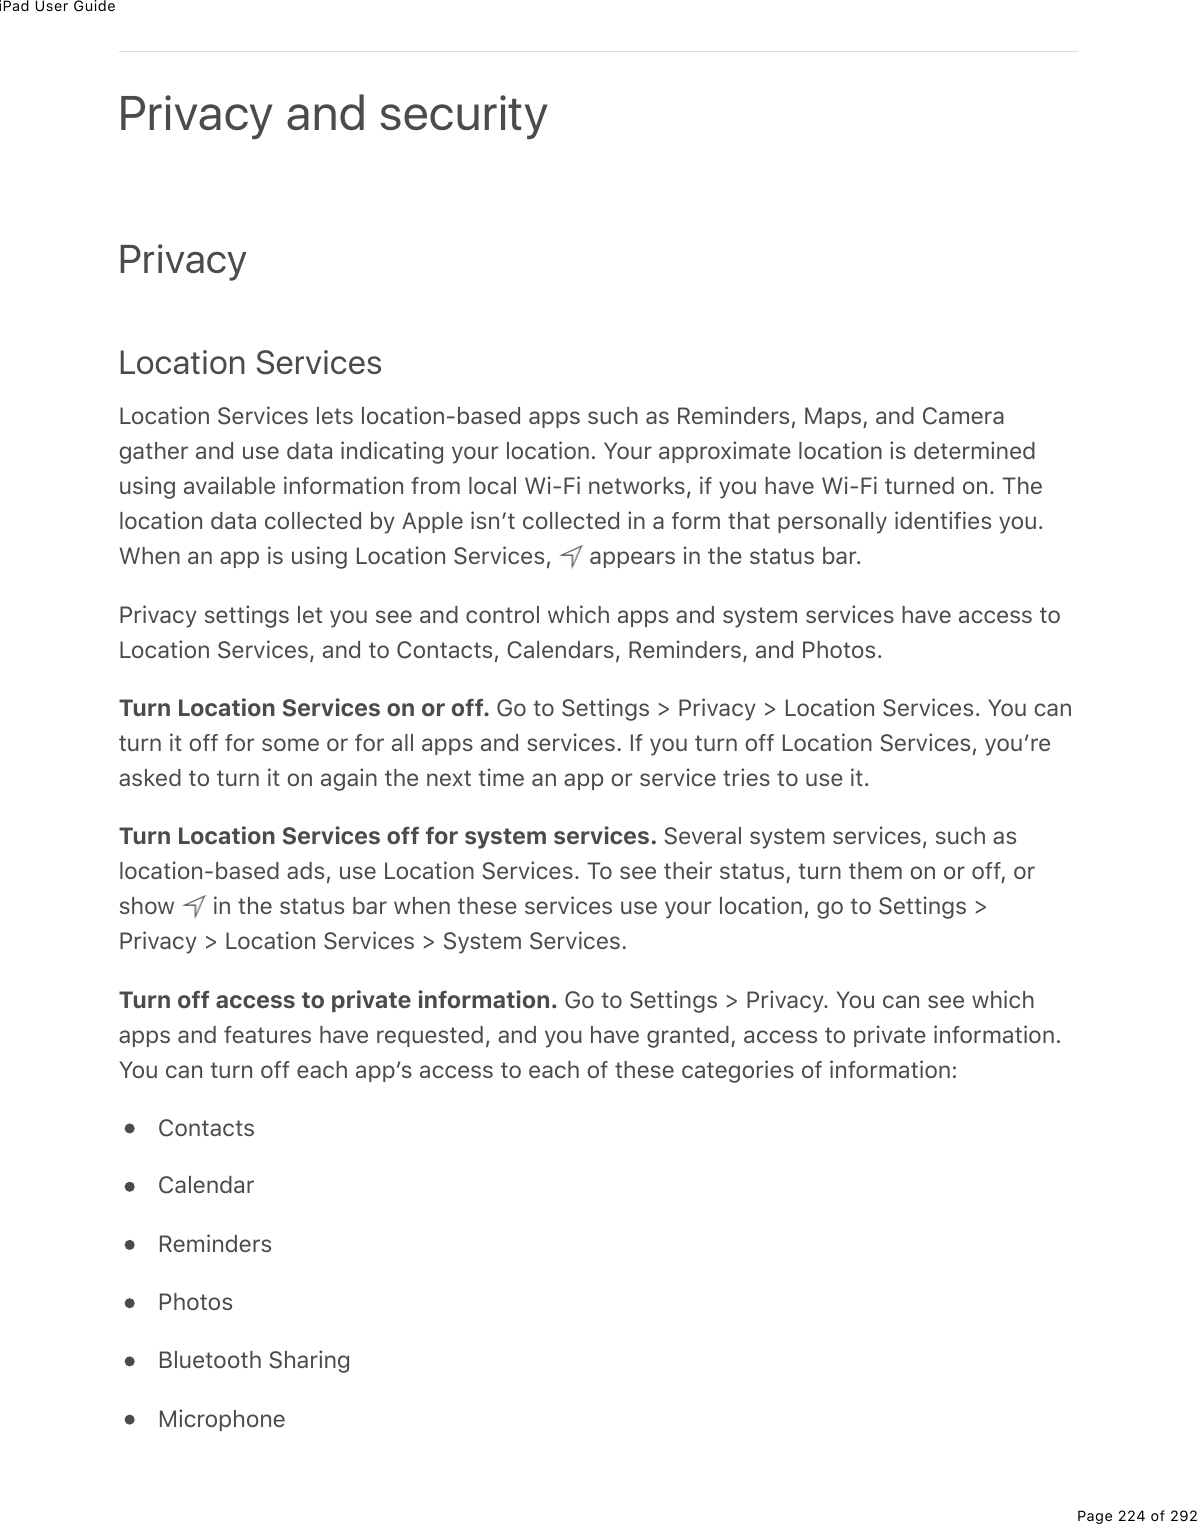 iPad User GuidePage 224 of 292PrivacyLocation ServicesV2)#&quot;.20%!($D.)(&amp;%3(&quot;&amp;%32)#&quot;.20Q5#&amp;(7%#--&amp;%&amp;&gt;)*%#&amp;%:(/.07($&amp;L%8#-&amp;L%#07%4#/($#;#&quot;*($%#07%&gt;&amp;(%7#&quot;#%.07.)#&quot;.0;%=2&gt;$%32)#&quot;.20E%Y2&gt;$%#--$2,./#&quot;(%32)#&quot;.20%.&amp;%7(&quot;($/.0(7&gt;&amp;.0;%#D#.3#53(%.092$/#&quot;.20%9$2/%32)#3%&lt;.QB.%0(&quot;12$&apos;&amp;L%.9%=2&gt;%*#D(%&lt;.QB.%&quot;&gt;$0(7%20E%M*(32)#&quot;.20%7#&quot;#%)233()&quot;(7%5=%?--3(%.&amp;0F&quot;%)233()&quot;(7%.0%#%92$/%&quot;*#&quot;%-($&amp;20#33=%.7(0&quot;.9.(&amp;%=2&gt;E&lt;*(0%#0%#--%.&amp;%&gt;&amp;.0;%V2)#&quot;.20%!($D.)(&amp;L% %#--(#$&amp;%.0%&quot;*(%&amp;&quot;#&quot;&gt;&amp;%5#$E@$.D#)=%&amp;(&quot;&quot;.0;&amp;%3(&quot;%=2&gt;%&amp;((%#07%)20&quot;$23%1*.)*%#--&amp;%#07%&amp;=&amp;&quot;(/%&amp;($D.)(&amp;%*#D(%#))(&amp;&amp;%&quot;2V2)#&quot;.20%!($D.)(&amp;L%#07%&quot;2%420&quot;#)&quot;&amp;L%4#3(07#$&amp;L%:(/.07($&amp;L%#07%@*2&quot;2&amp;ETurn Location Services on or off. 62%&quot;2%!(&quot;&quot;.0;&amp;%[%@$.D#)=%[%V2)#&quot;.20%!($D.)(&amp;E%Y2&gt;%)#0&quot;&gt;$0%.&quot;%299%92$%&amp;2/(%2$%92$%#33%#--&amp;%#07%&amp;($D.)(&amp;E%S9%=2&gt;%&quot;&gt;$0%299%V2)#&quot;.20%!($D.)(&amp;L%=2&gt;F$(#&amp;&apos;(7%&quot;2%&quot;&gt;$0%.&quot;%20%#;#.0%&quot;*(%0(,&quot;%&quot;./(%#0%#--%2$%&amp;($D.)(%&quot;$.(&amp;%&quot;2%&gt;&amp;(%.&quot;ETurn Location Services off for system services. !(D($#3%&amp;=&amp;&quot;(/%&amp;($D.)(&amp;L%&amp;&gt;)*%#&amp;32)#&quot;.20Q5#&amp;(7%#7&amp;L%&gt;&amp;(%V2)#&quot;.20%!($D.)(&amp;E%M2%&amp;((%&quot;*(.$%&amp;&quot;#&quot;&gt;&amp;L%&quot;&gt;$0%&quot;*(/%20%2$%299L%2$&amp;*21% %.0%&quot;*(%&amp;&quot;#&quot;&gt;&amp;%5#$%1*(0%&quot;*(&amp;(%&amp;($D.)(&amp;%&gt;&amp;(%=2&gt;$%32)#&quot;.20L%;2%&quot;2%!(&quot;&quot;.0;&amp;%[@$.D#)=%[%V2)#&quot;.20%!($D.)(&amp;%[%!=&amp;&quot;(/%!($D.)(&amp;ETurn off access to private information. 62%&quot;2%!(&quot;&quot;.0;&amp;%[%@$.D#)=E%Y2&gt;%)#0%&amp;((%1*.)*#--&amp;%#07%9(#&quot;&gt;$(&amp;%*#D(%$(]&gt;(&amp;&quot;(7L%#07%=2&gt;%*#D(%;$#0&quot;(7L%#))(&amp;&amp;%&quot;2%-$.D#&quot;(%.092$/#&quot;.20EY2&gt;%)#0%&quot;&gt;$0%299%(#)*%#--F&amp;%#))(&amp;&amp;%&quot;2%(#)*%29%&quot;*(&amp;(%)#&quot;(;2$.(&amp;%29%.092$/#&quot;.20O420&quot;#)&quot;&amp;4#3(07#$:(/.07($&amp;@*2&quot;2&amp;J3&gt;(&quot;22&quot;*%!*#$.0;8.)$2-*20(Privacy and security